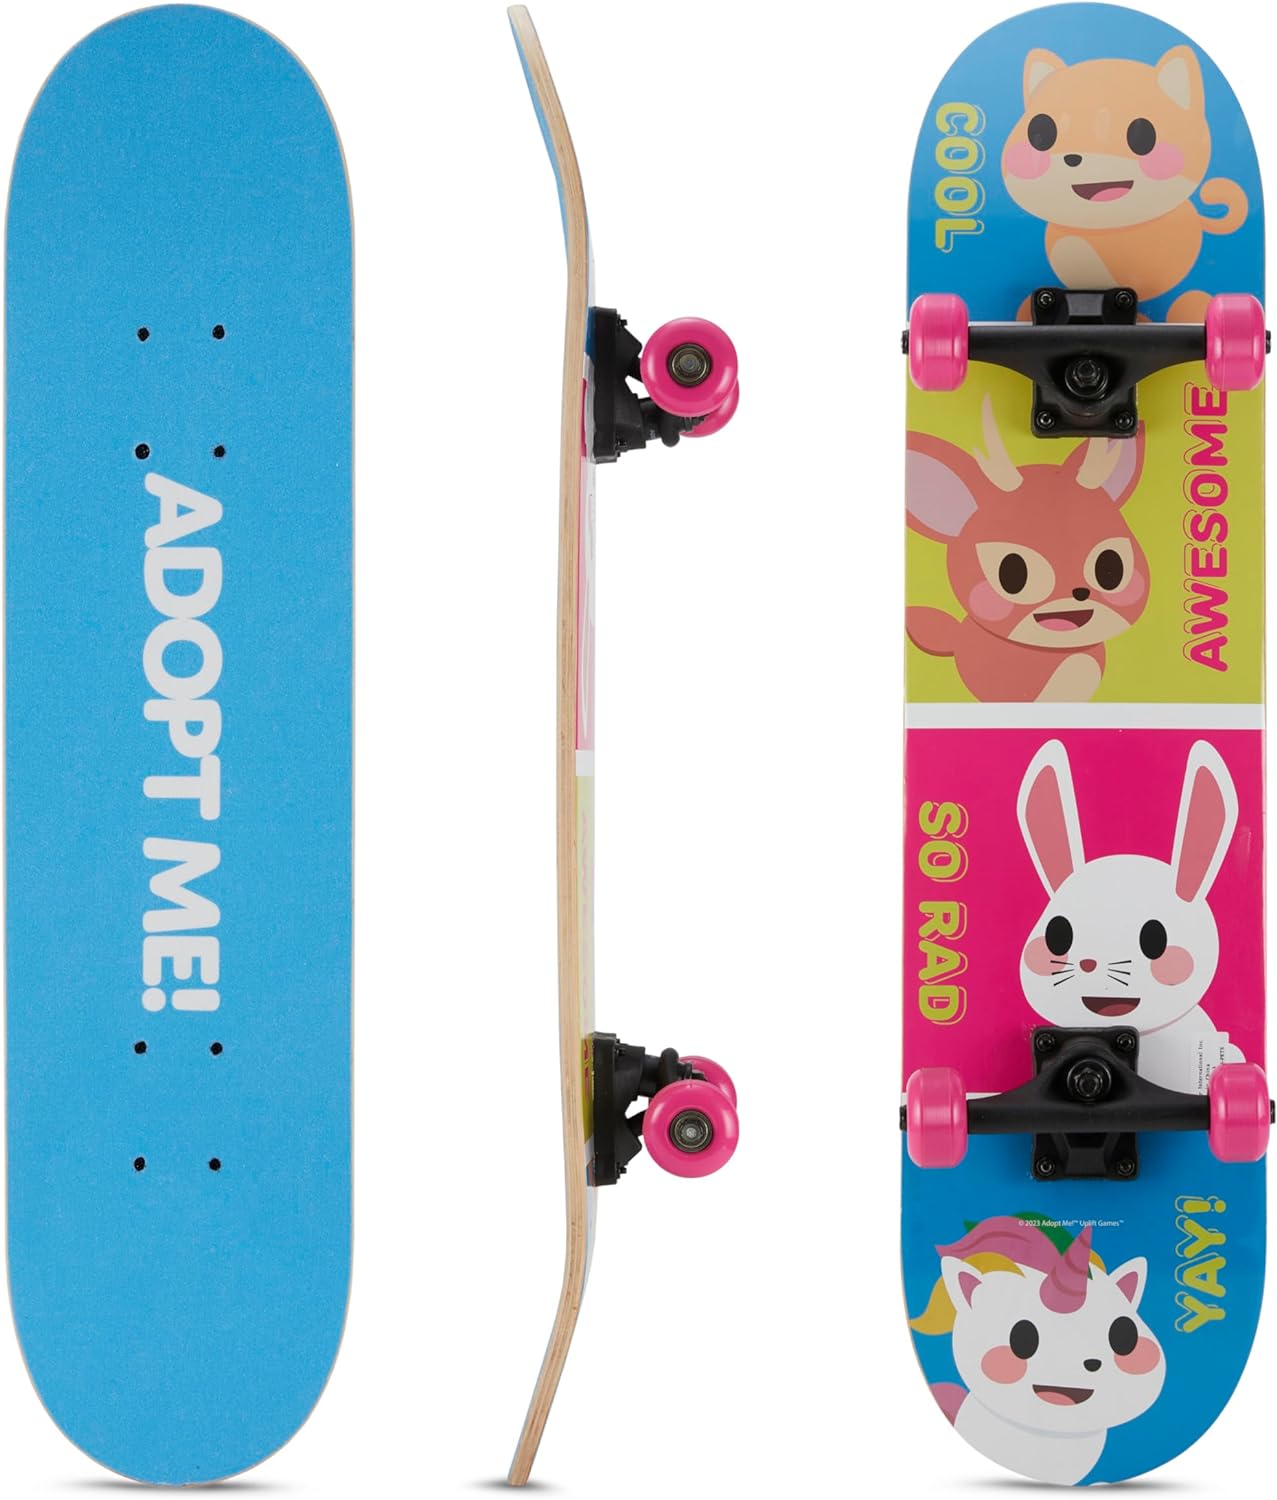 Adopt Me 31 Skateboard Great for Kids and Teens Cruiser Skateboard with ABEC 5 Bearings, Durable Deck, Smooth Wheels